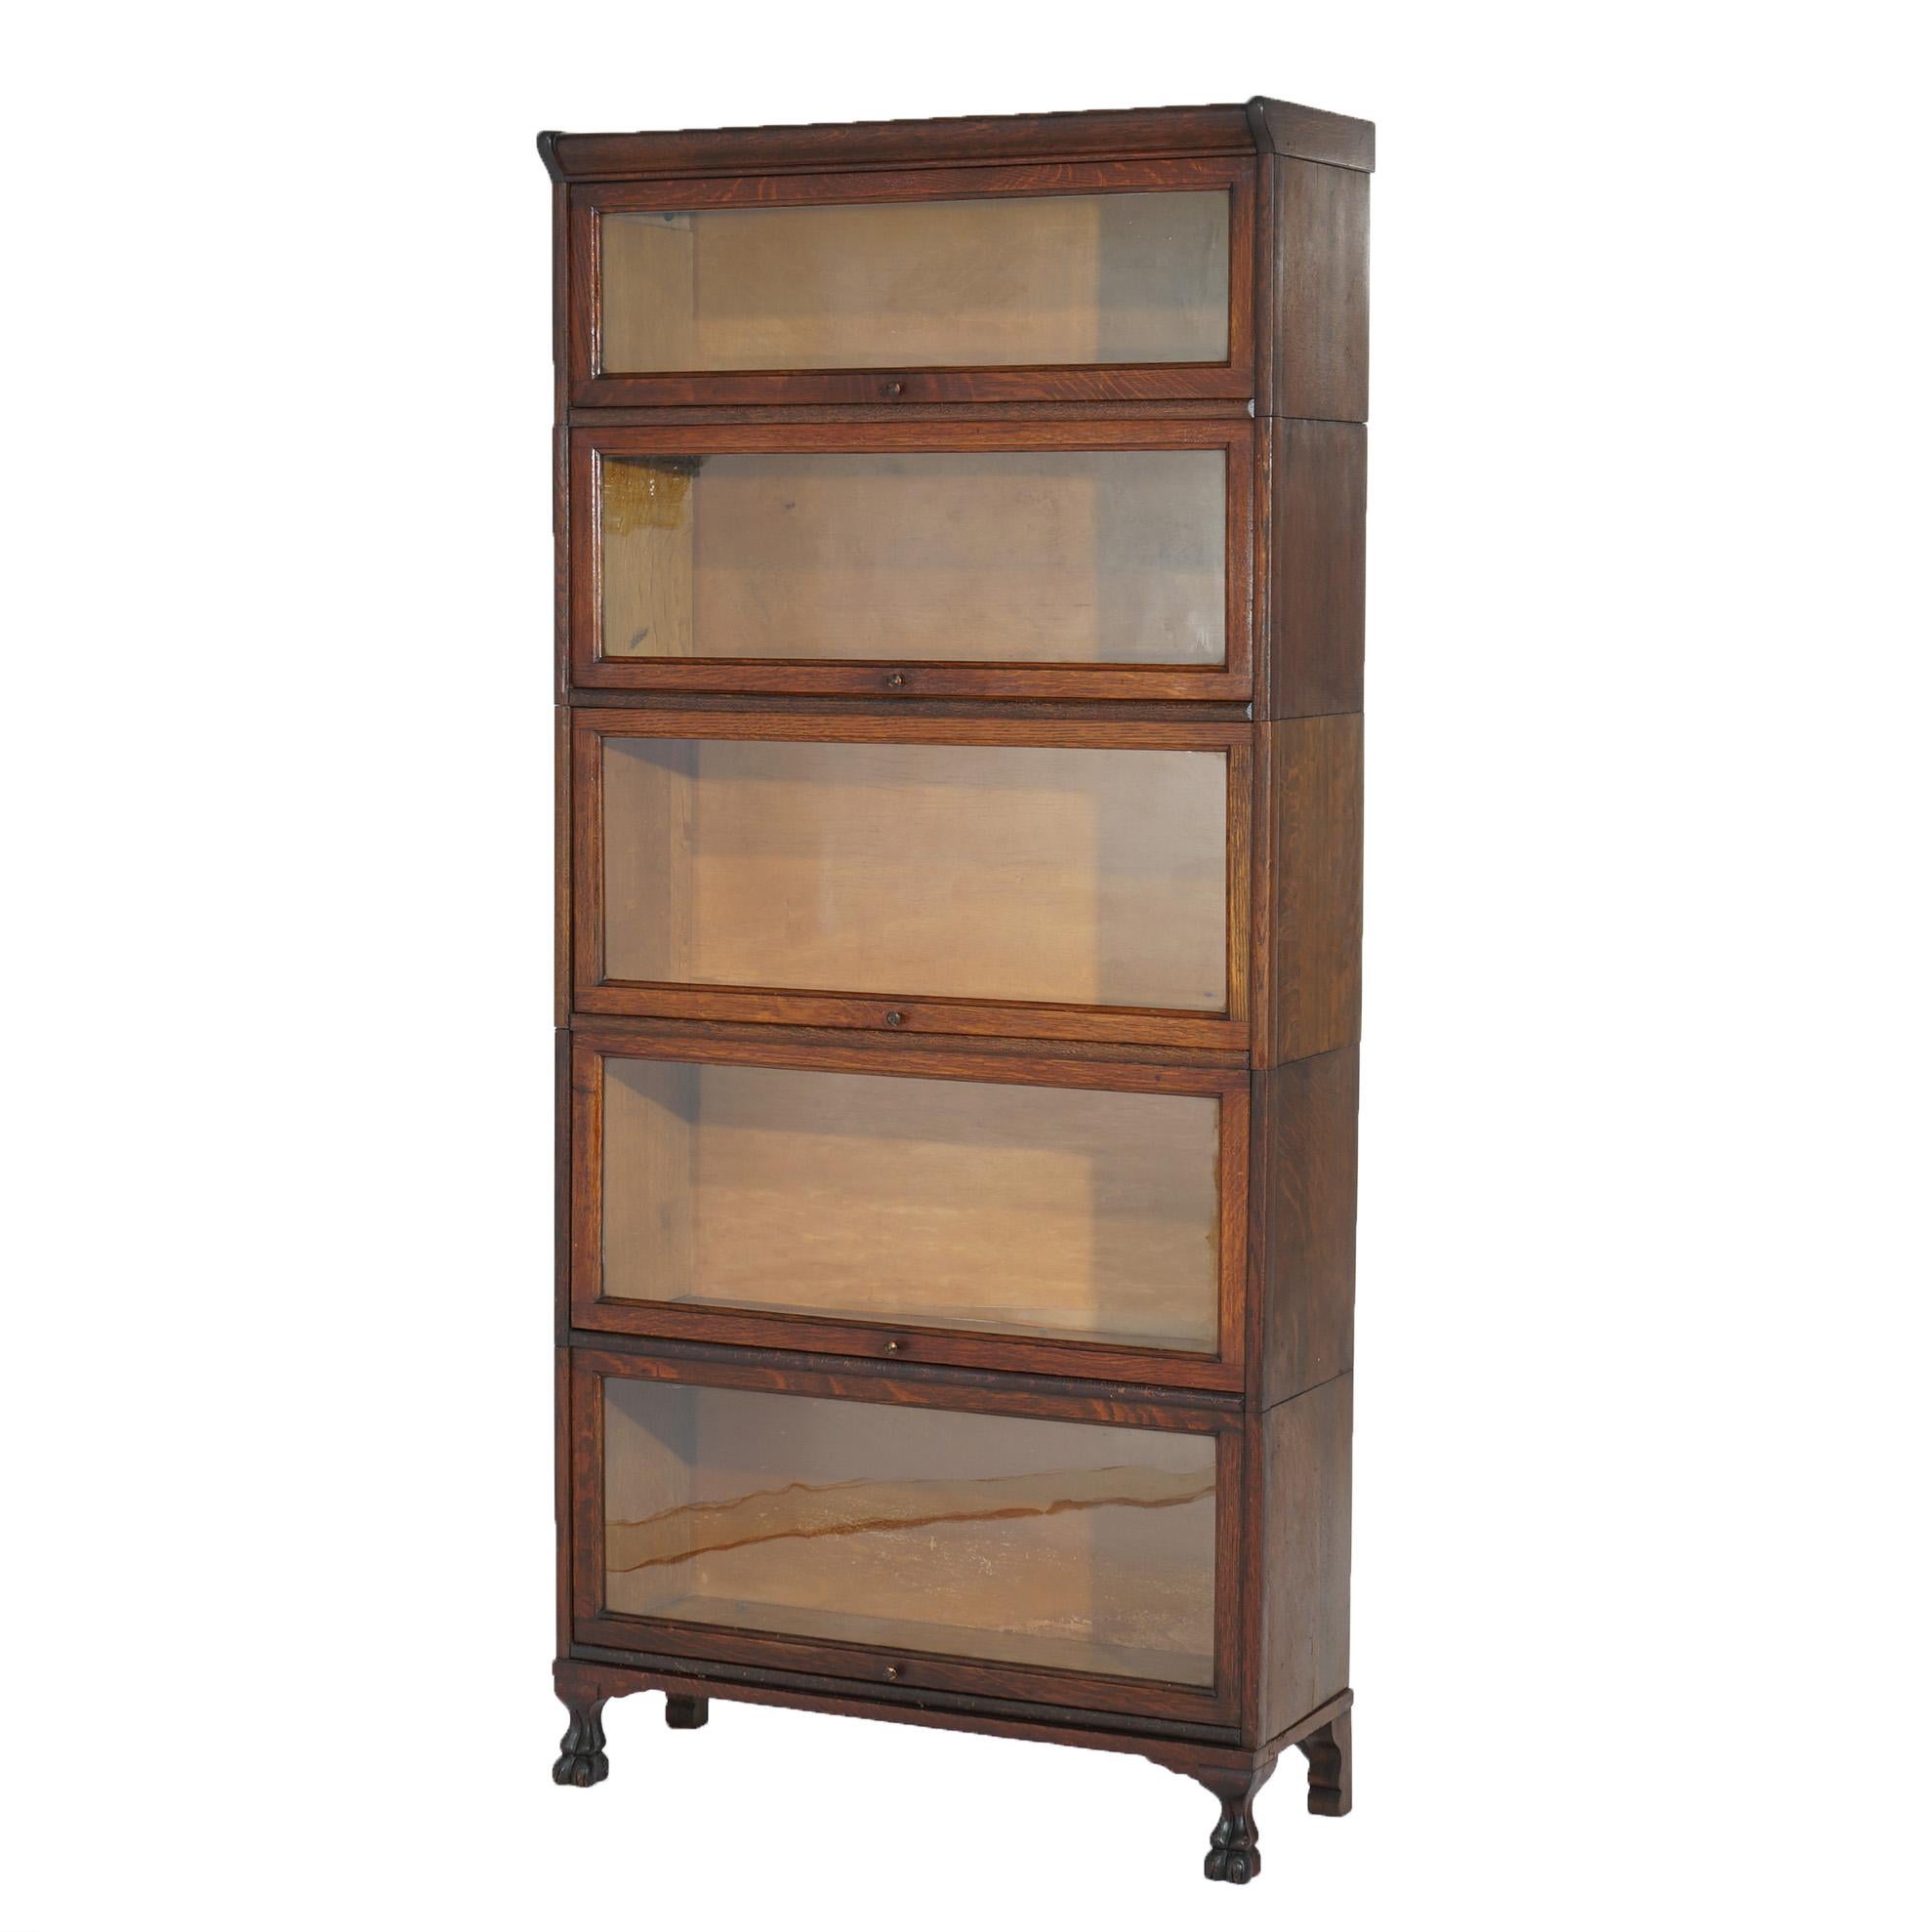 ***Ask About Discounted In-House Shipping***
An antique Arts & Crafts Mission barrister bookcase offers oak construction with five stacks, each having pullout glass doors, and raised on stylized paw feet, c1910

Measures - 73 1/4